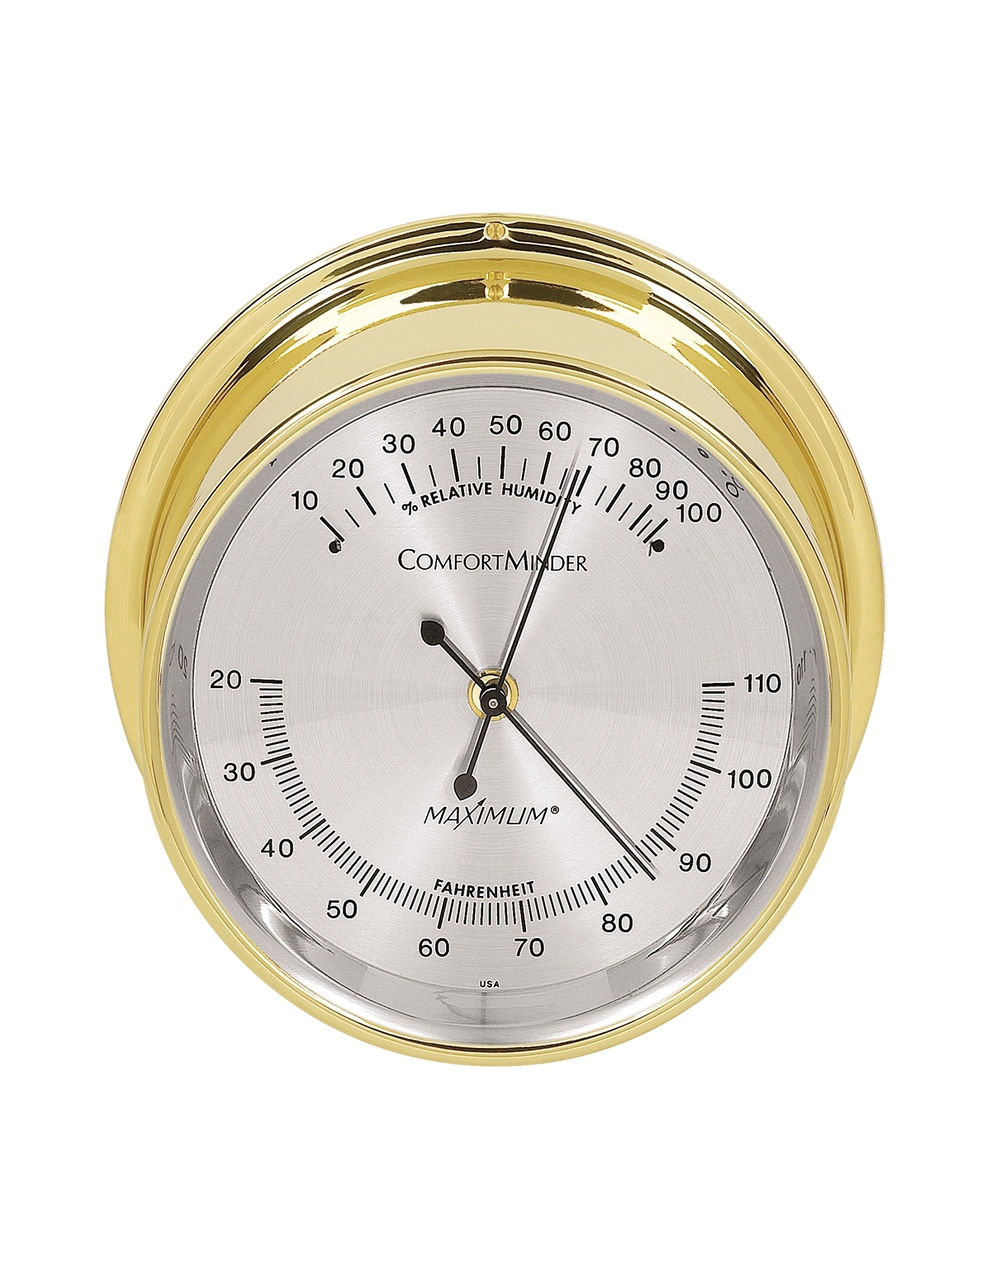 Comfortminder Humidity and Thermometer Comfort Reading Instrument - PVD Coated Brass Case  - Silver Face